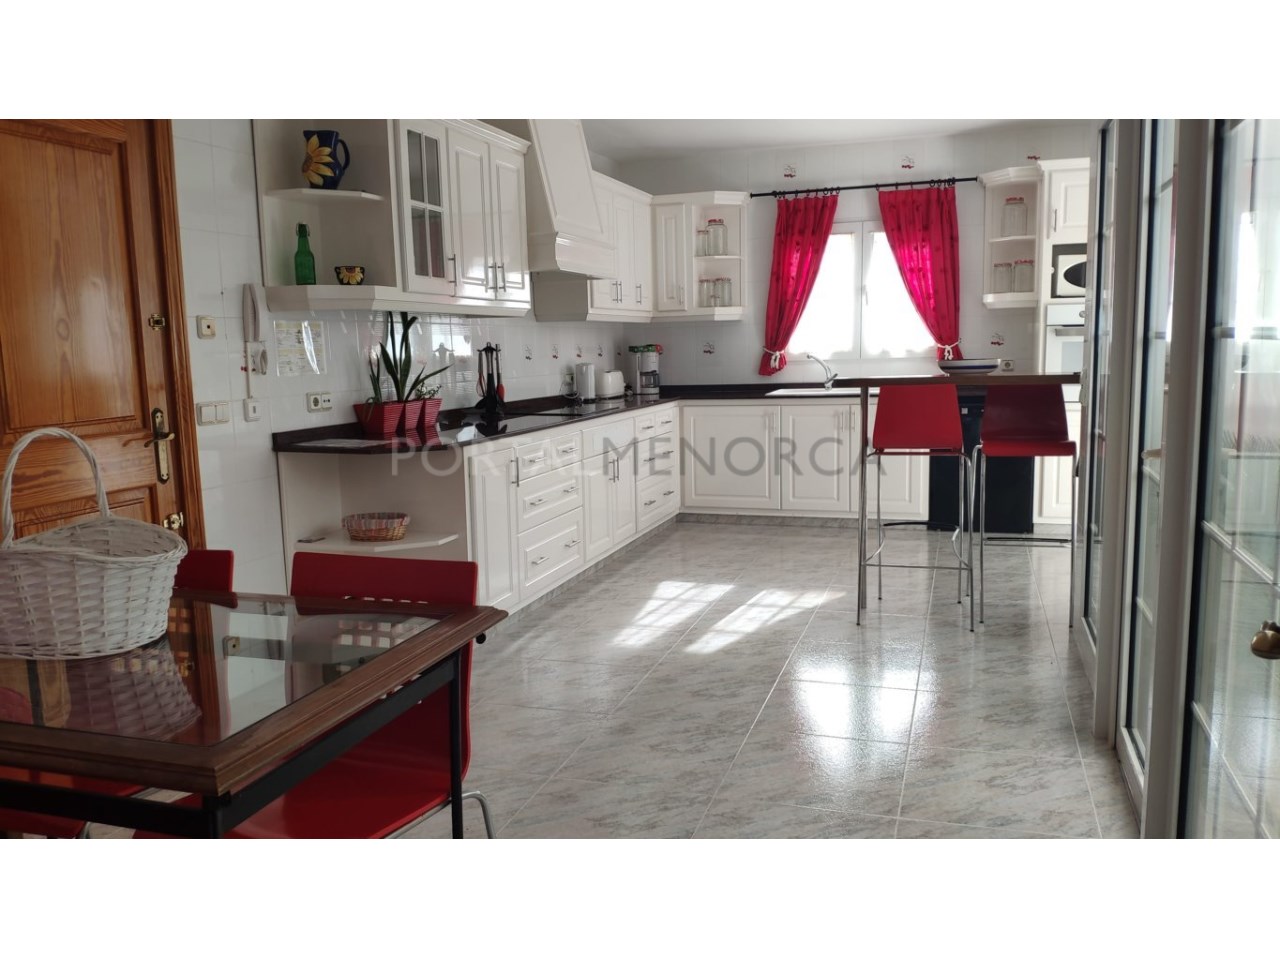 Villa for sale in Calan Blanes with a tourist license Ciutadella Menorca-Kitchen and dinning Room